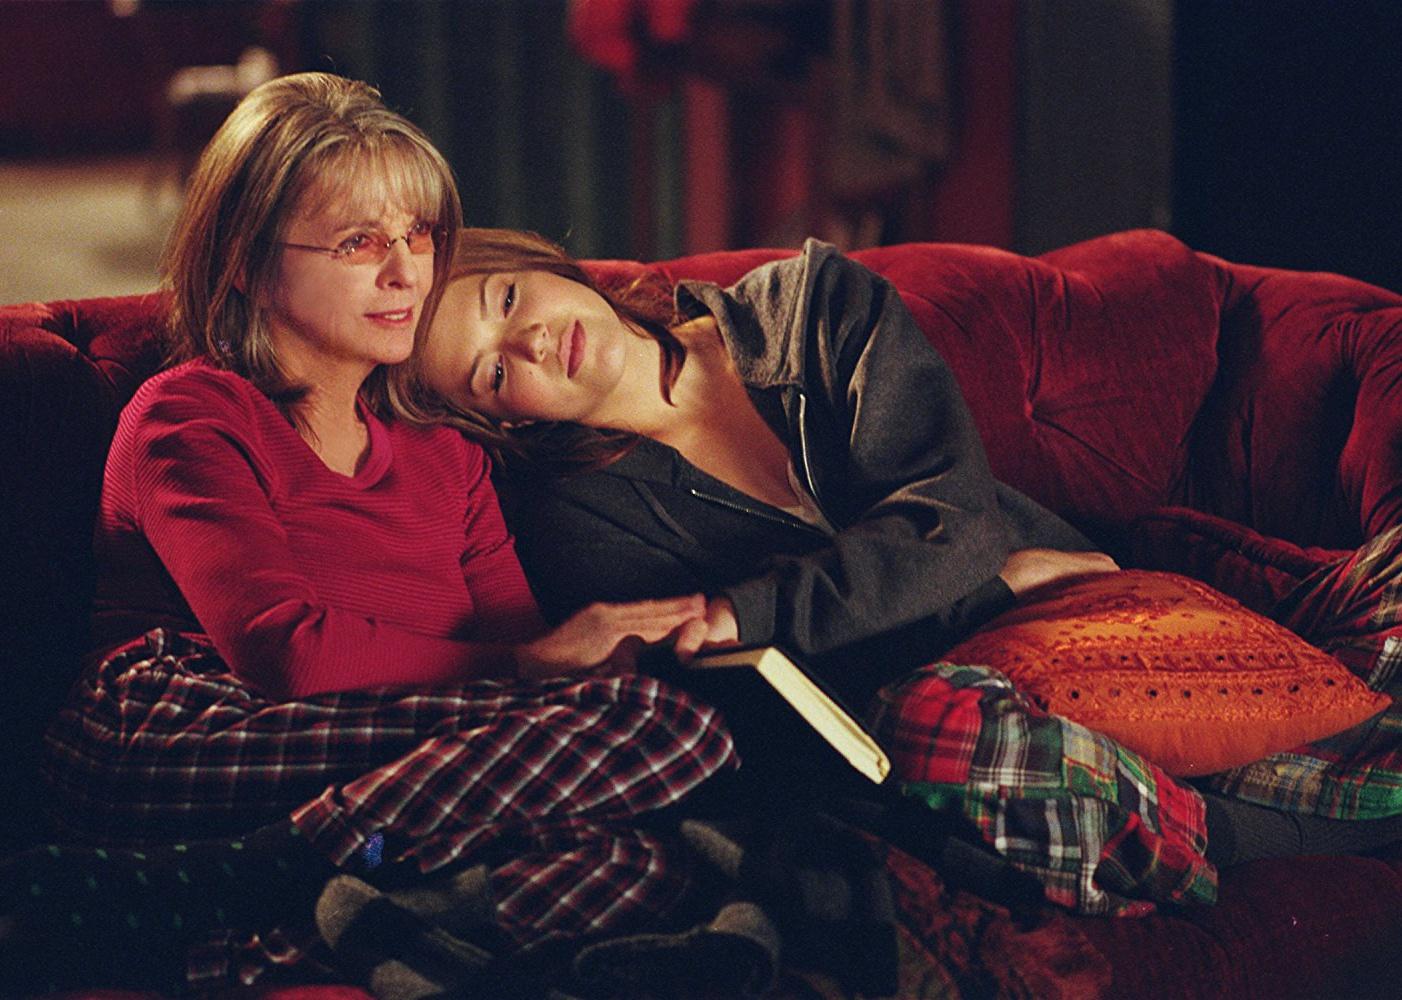 Diane Keaton and Mandy Moore snuggled up on a couch.